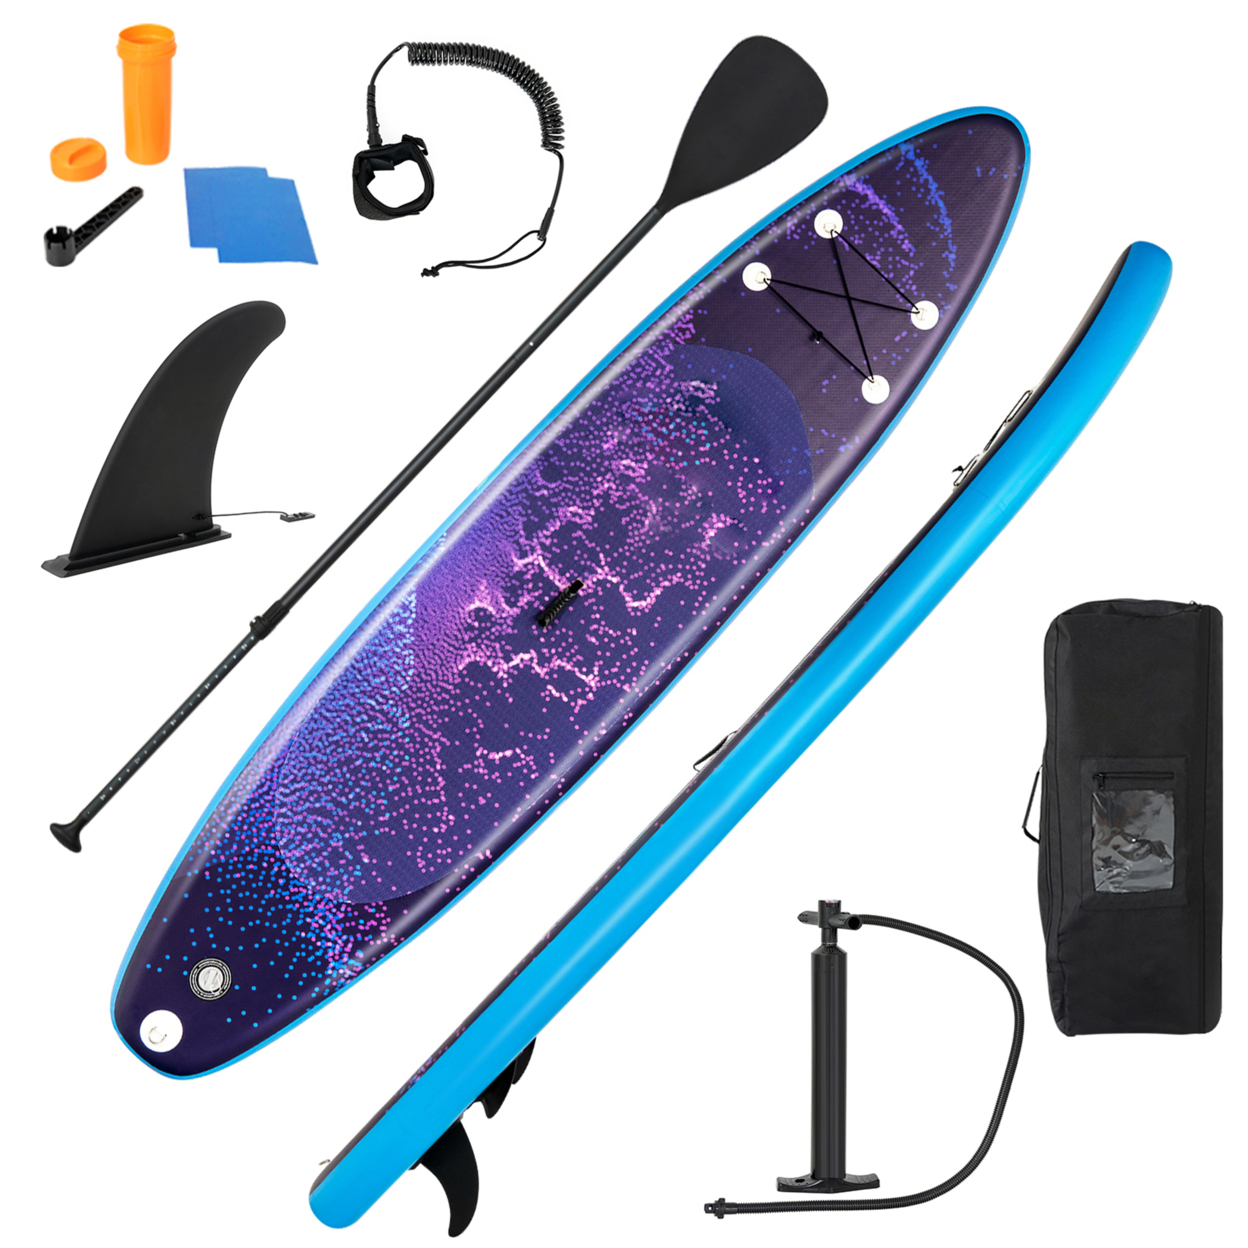 10.5 Ft Inflatable Stand-Up Paddle Board Non-Slip Deck Surfboard W/ Hand Pump